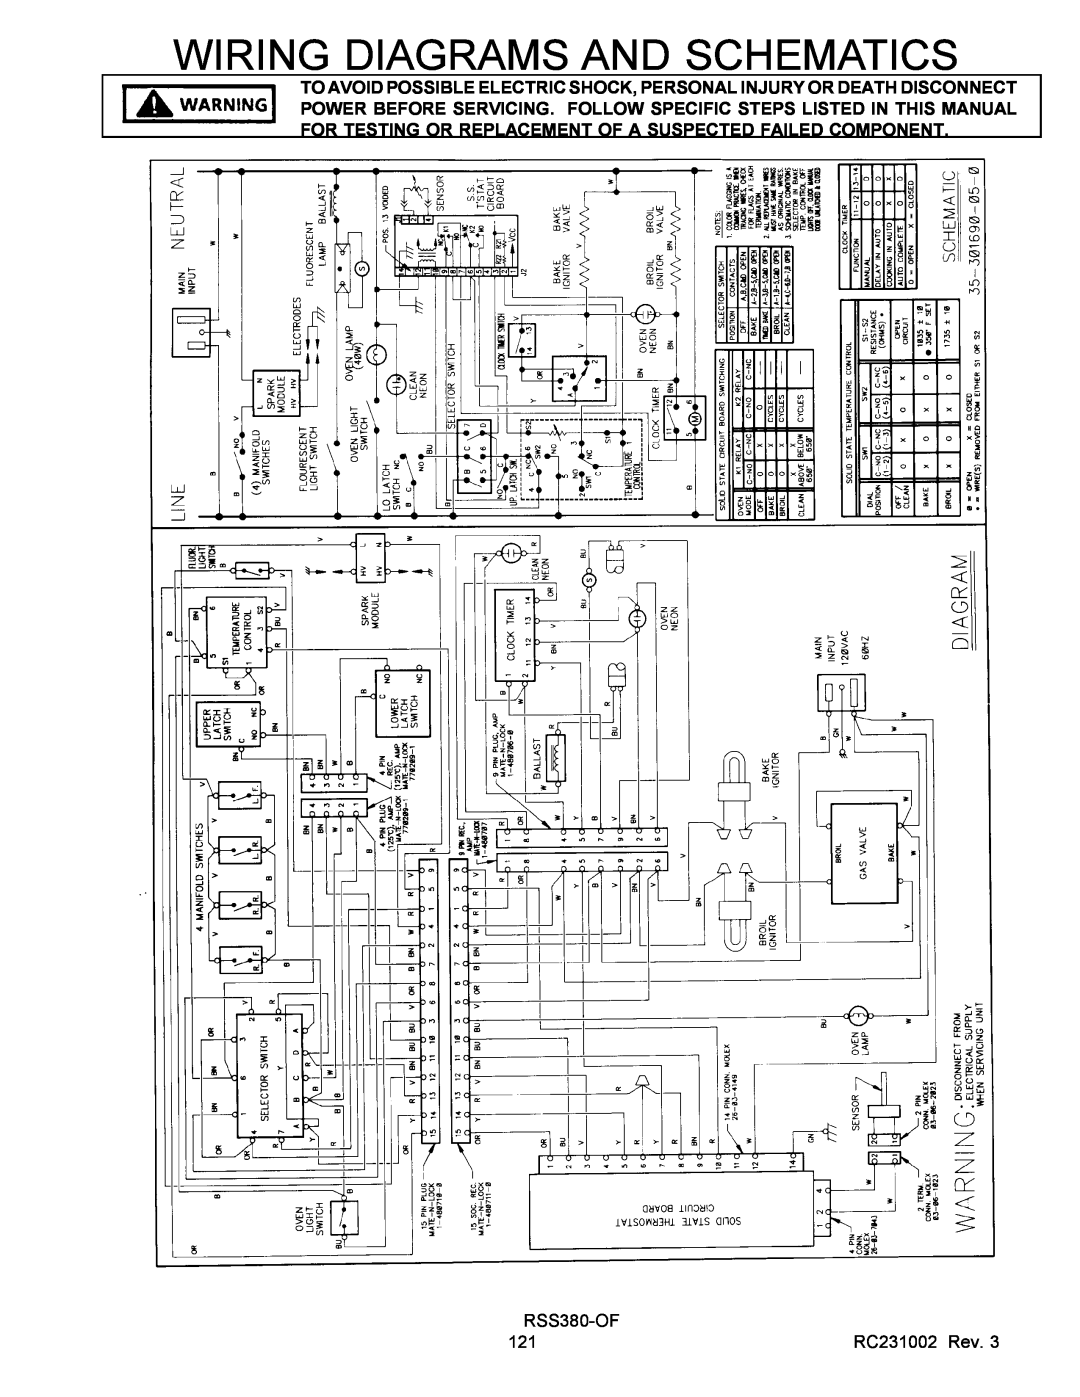 Amana RST service manual Wiring Diagrams And Schematics, RSS380-OF, RC231002 Rev 